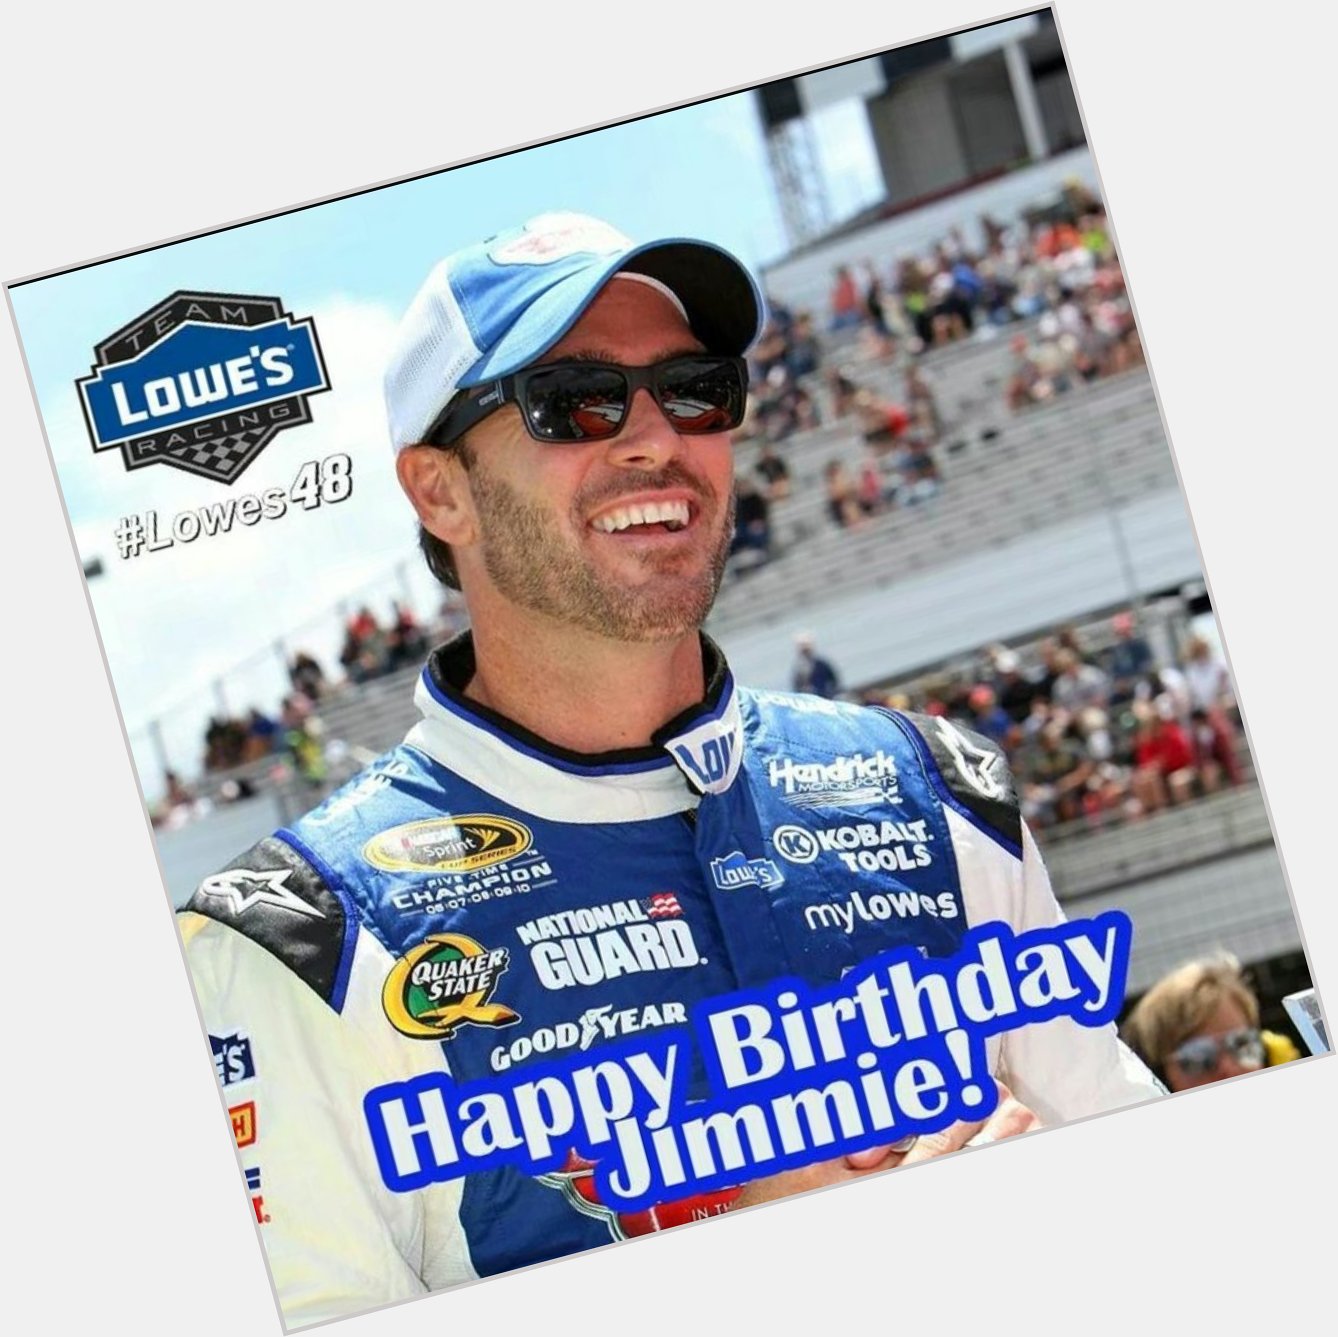 Happy birthday to you Jimmie Johnson! 